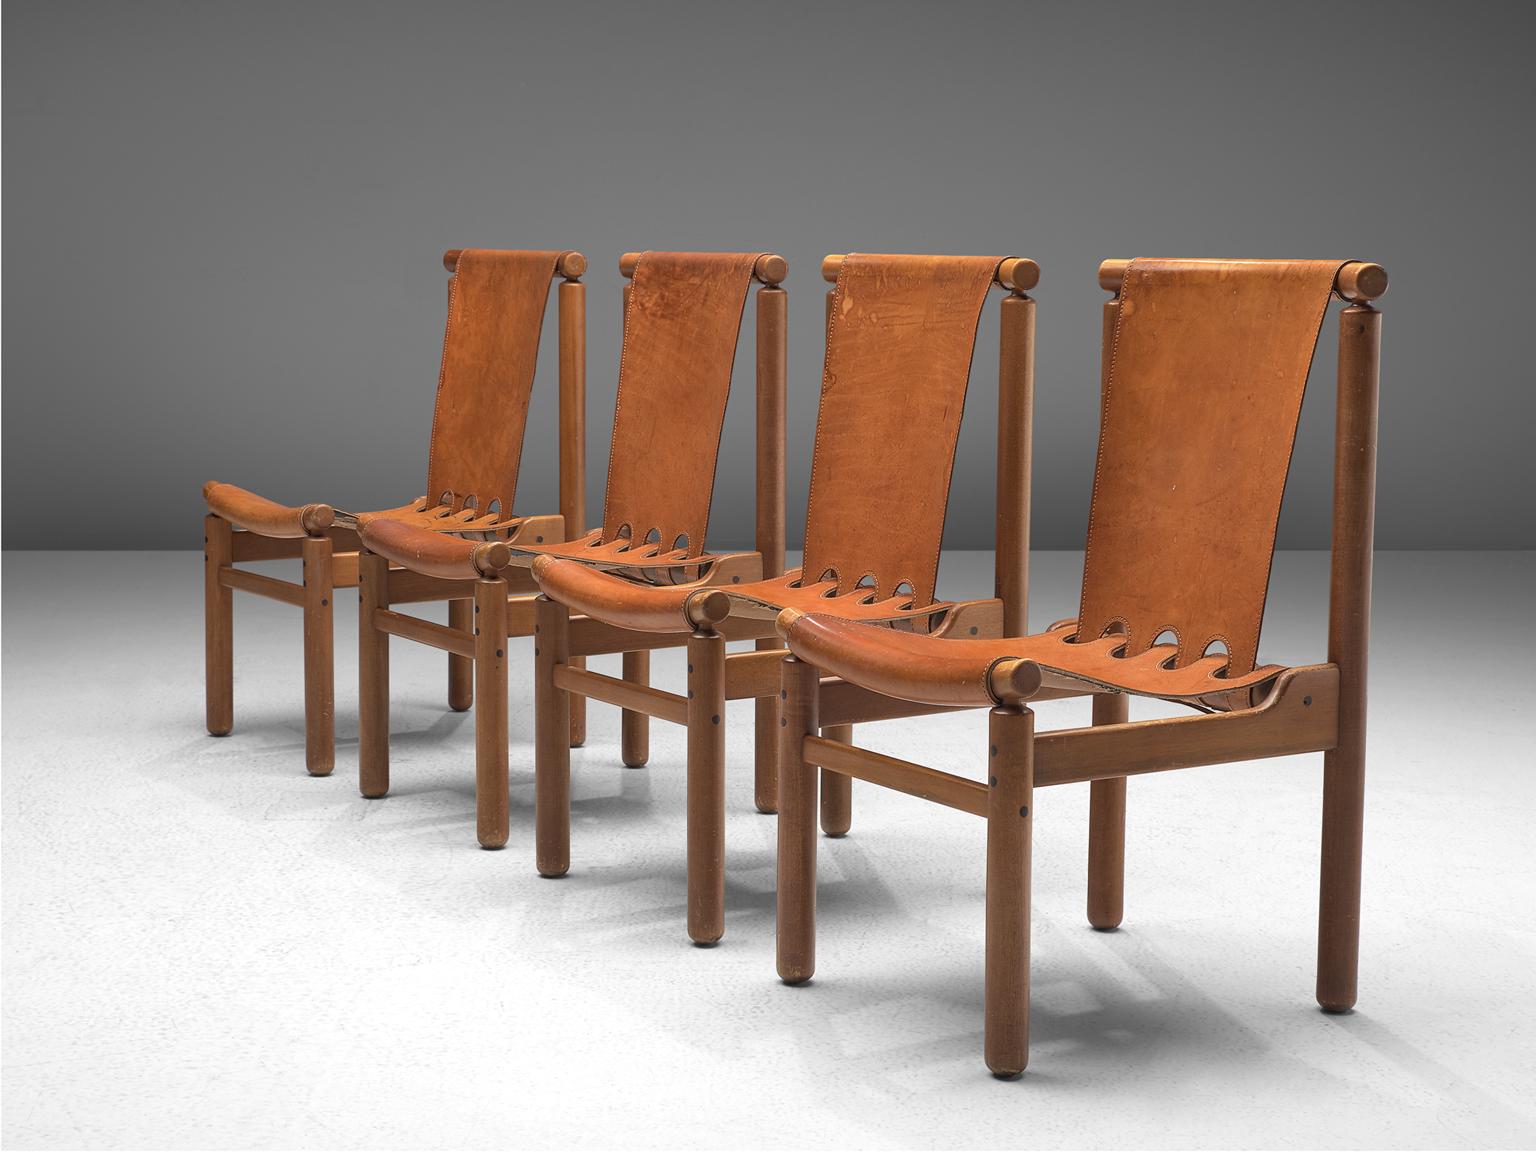 Dining chairs, wood and leather, Finland, 1950s.

These robust chairs feature a geometric, sturdy frame. Yet they feature a certain spaciousness thanks to the decorative opening on the bottom of the backrest. The joints are all very visible, which